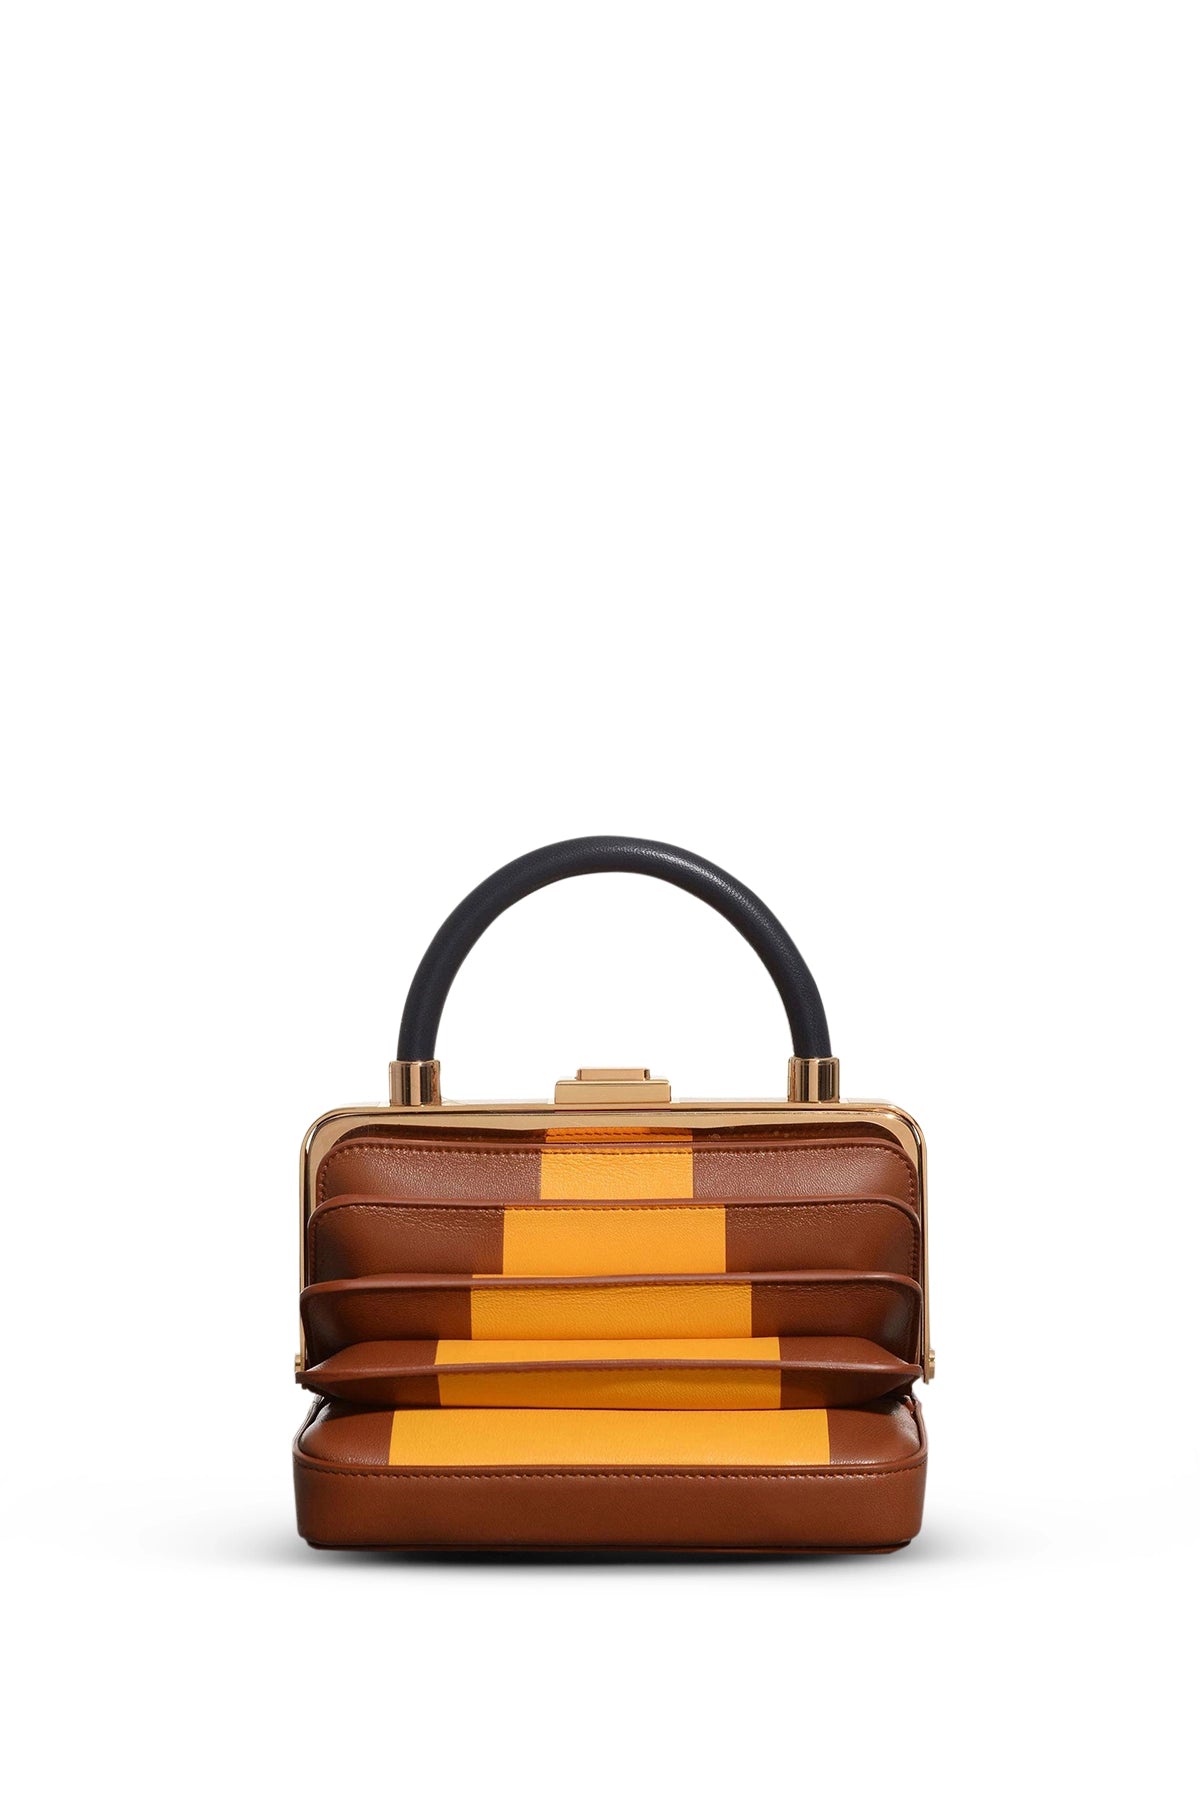 Diana Bag in Cognac, Yellow & Black Nappa Leather